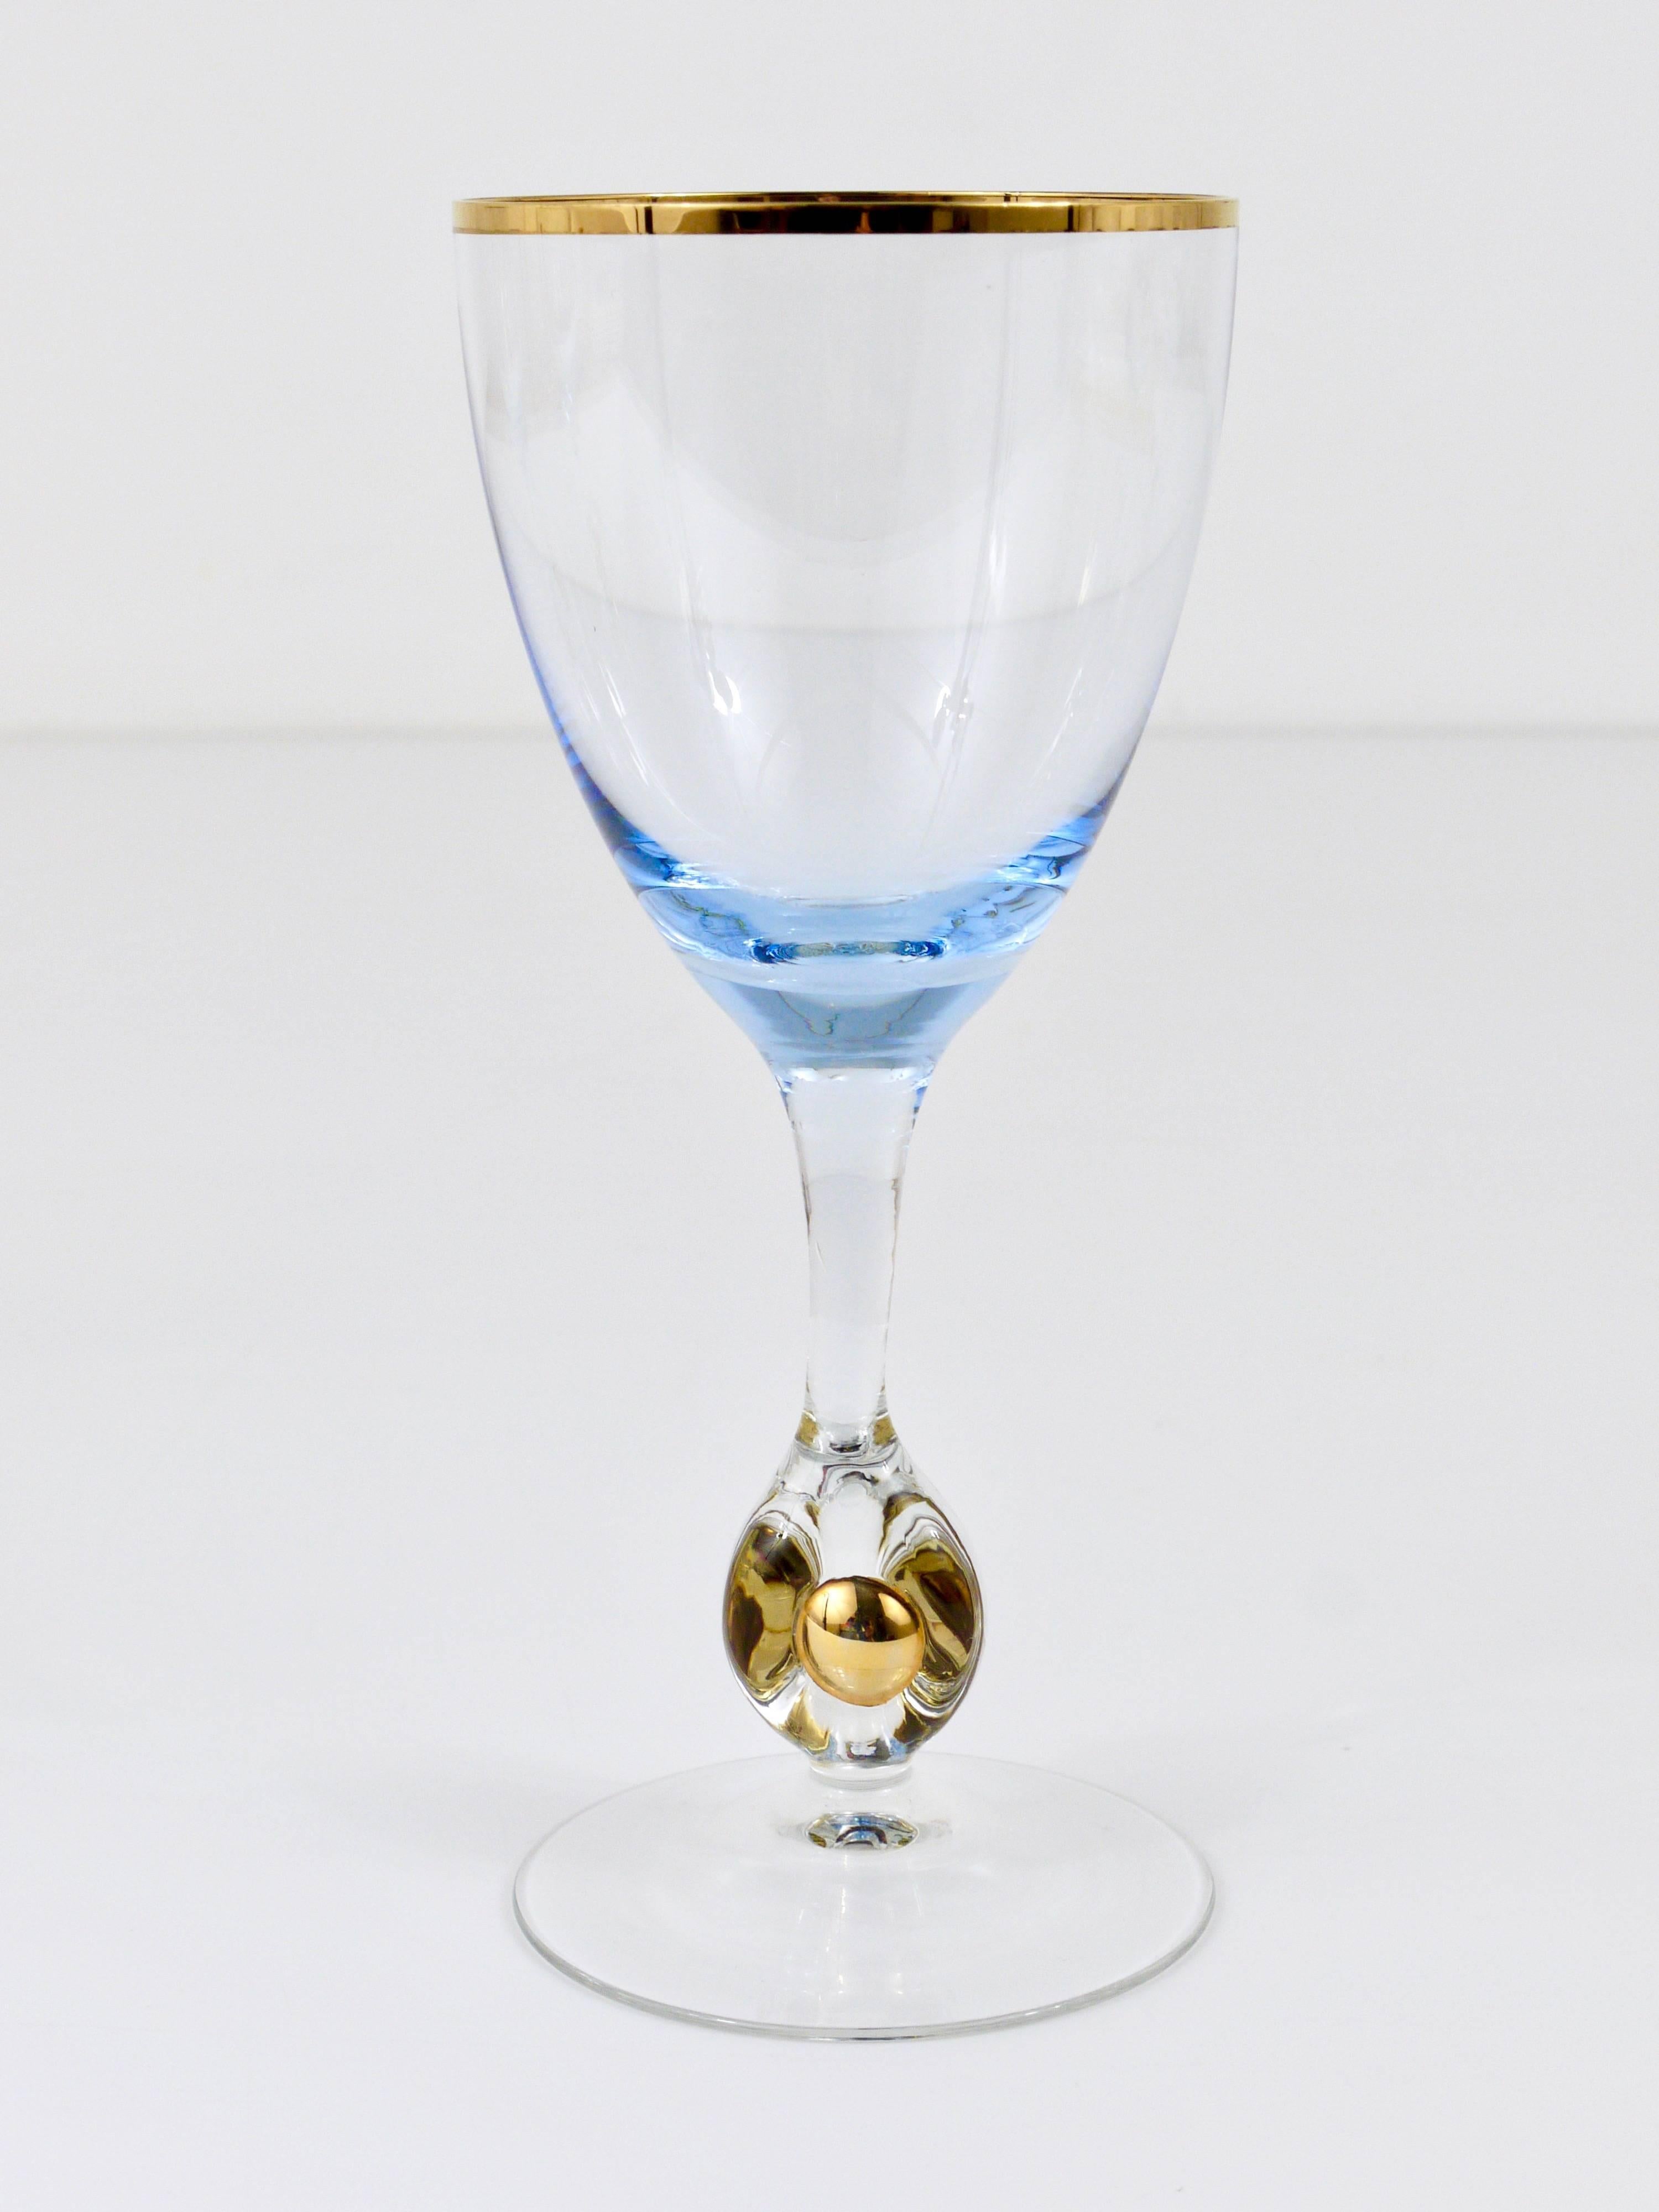 A set of six beautiful handblown wine or water glasses, made of clear and light blue glass with gold rim and a golden ball in the stem. Made by Lyngby Glassworks in Denmark in the 1960s. In excellent condition, we think, the glasses are unused.